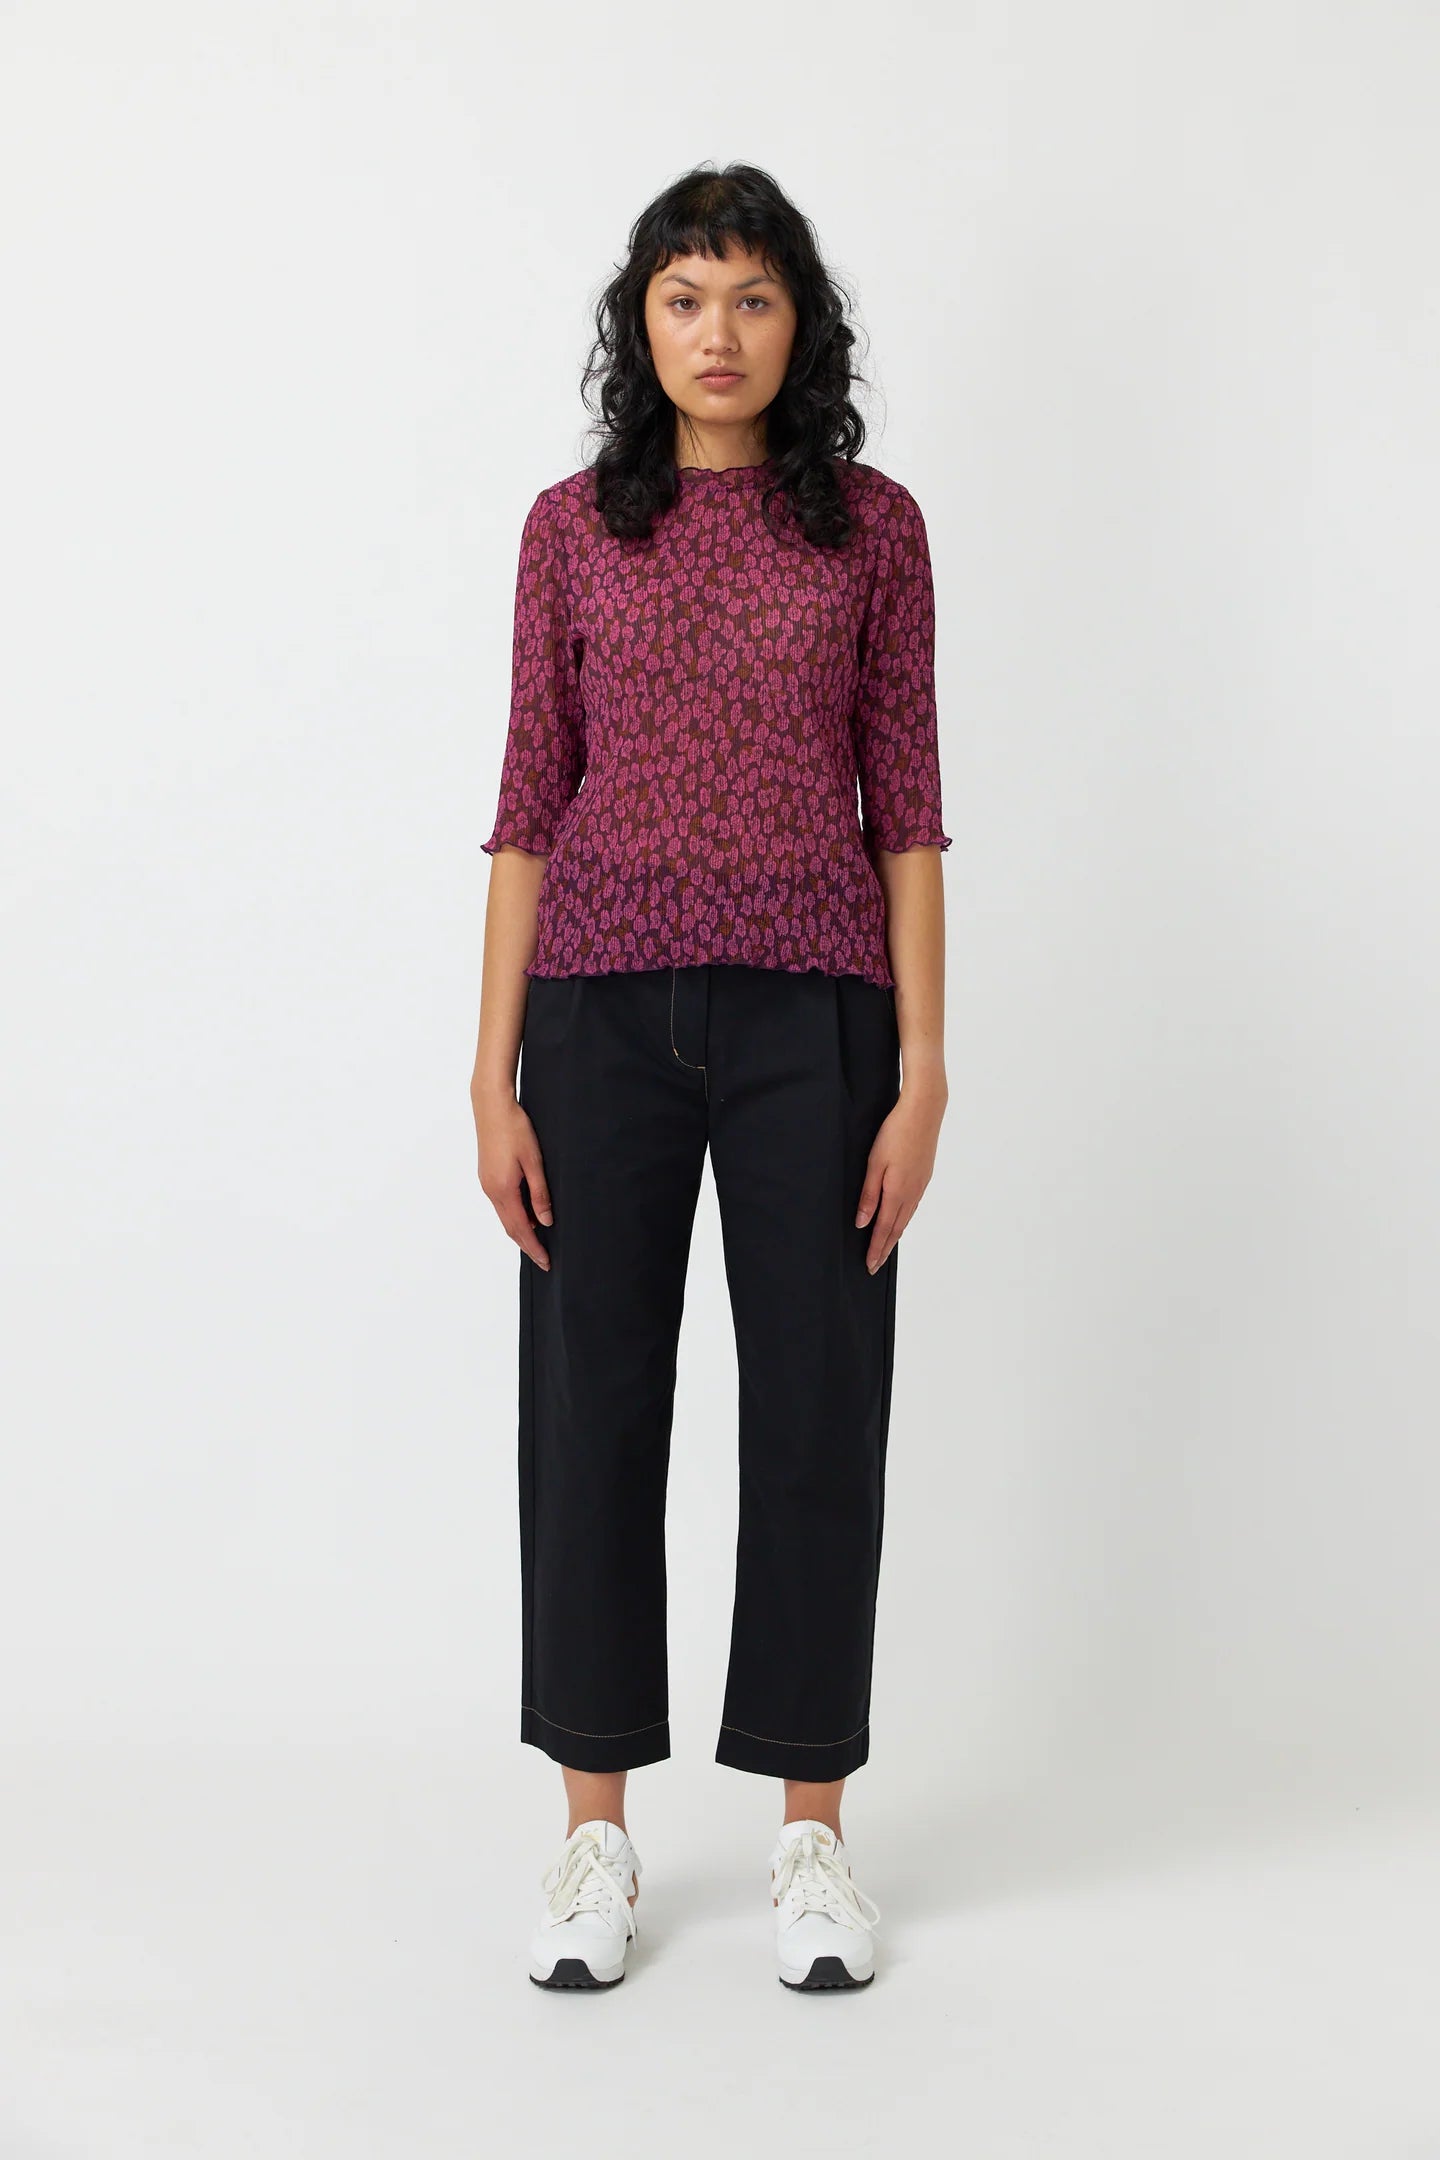 Sylvester Blooming top - Berry